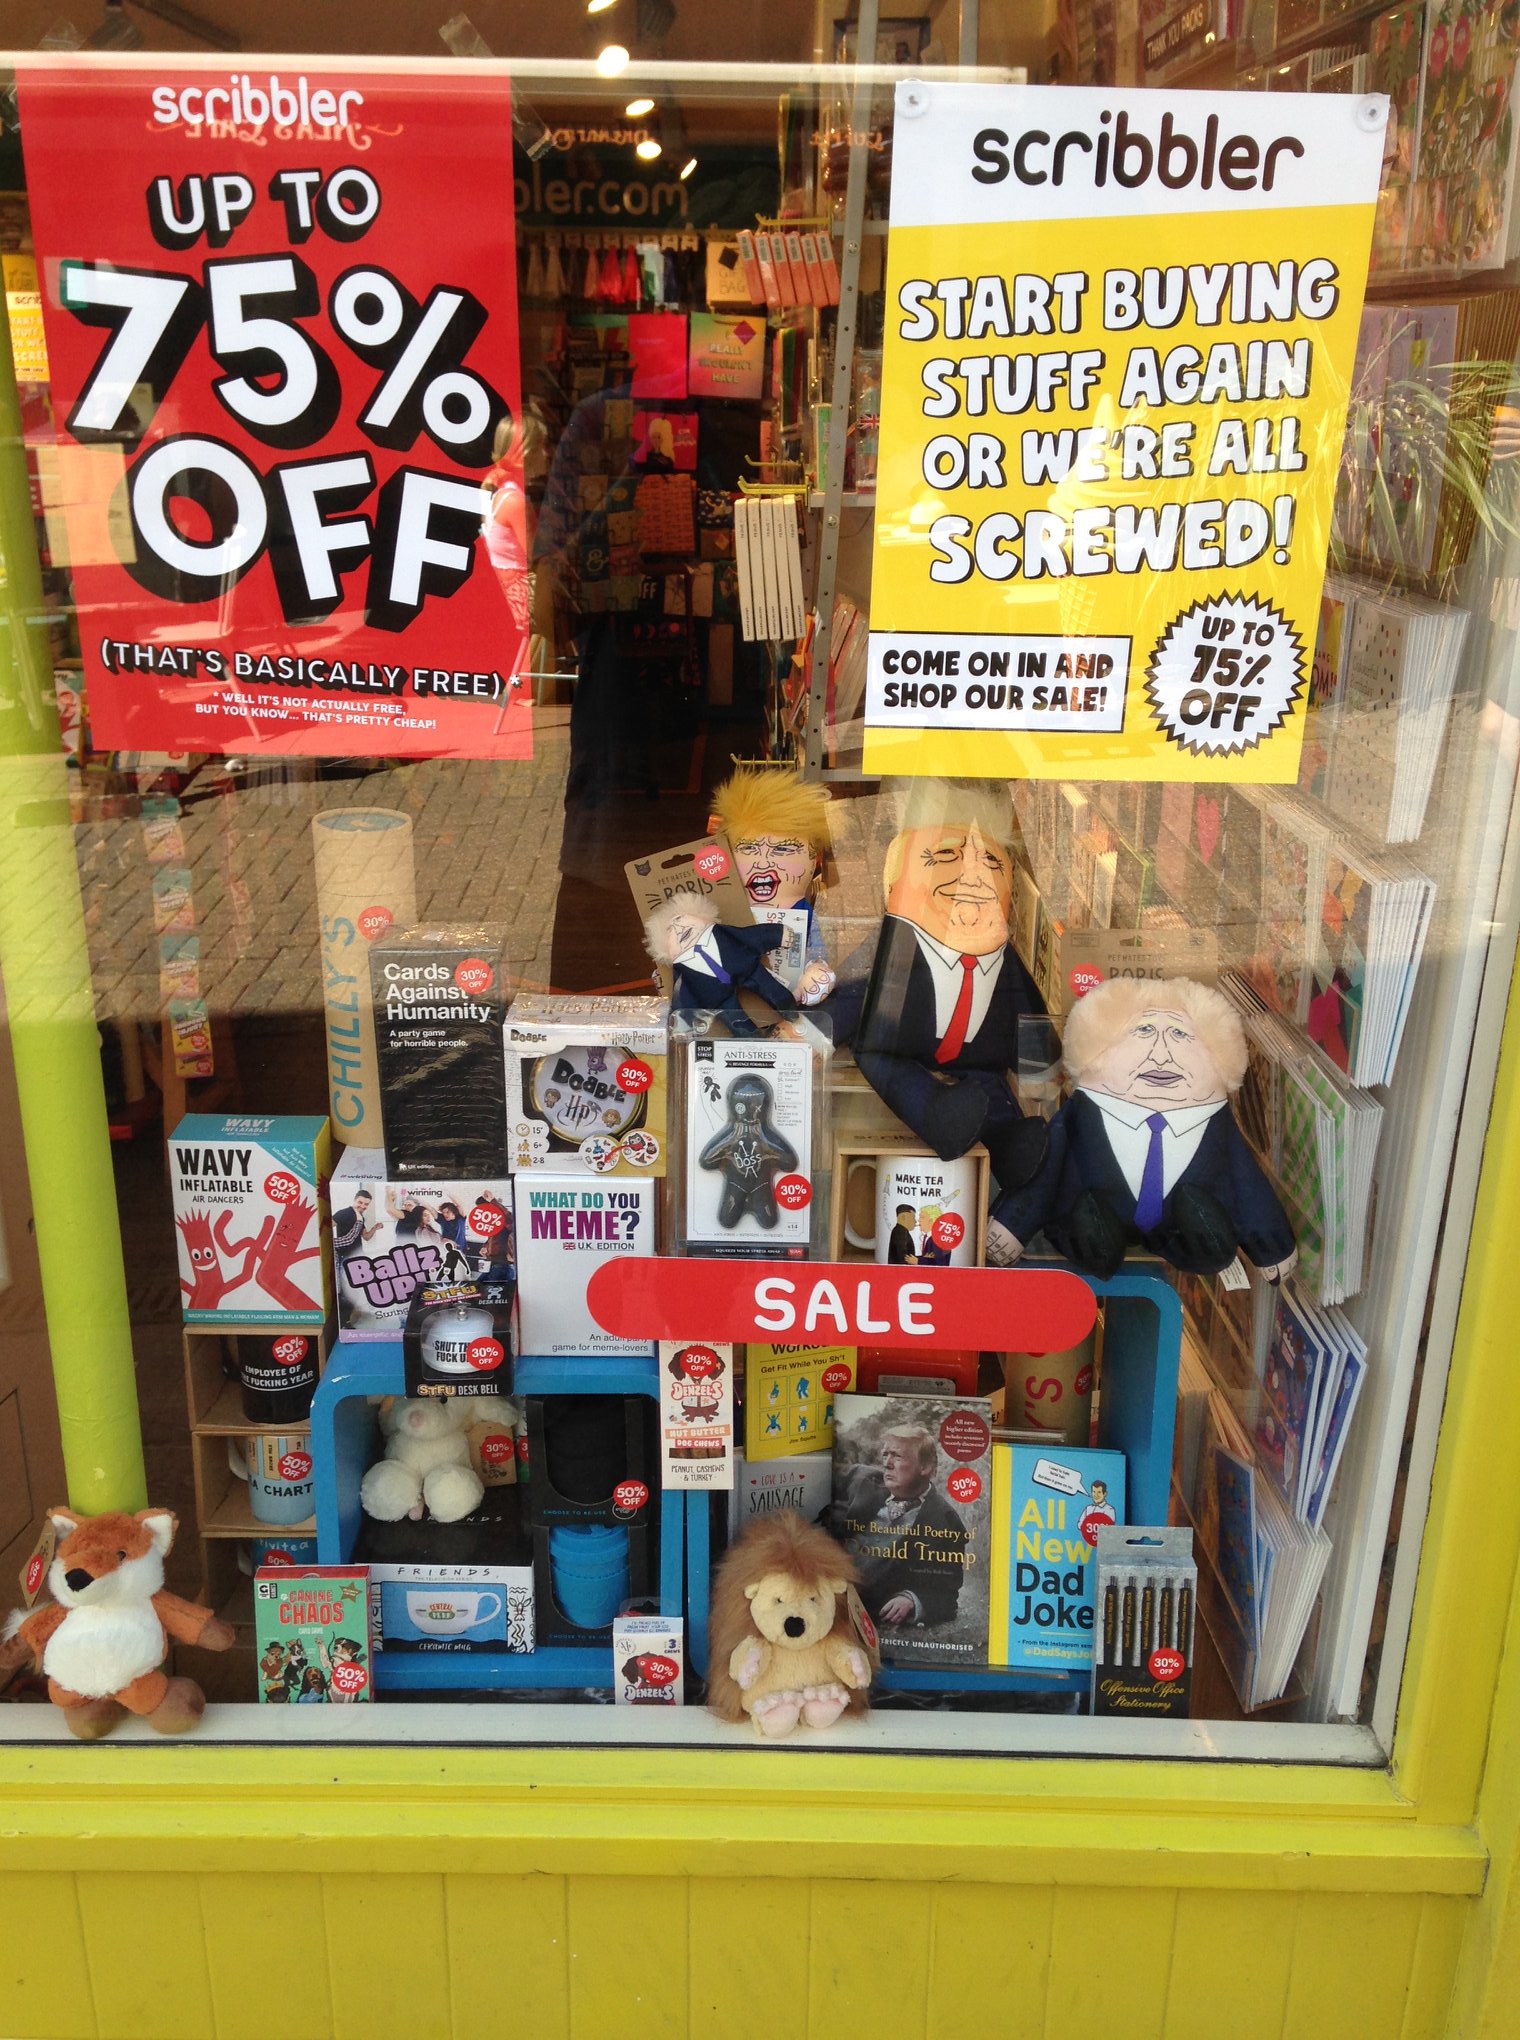 Above: Scribbler’s sale window last year to encourage shoppers to spend.